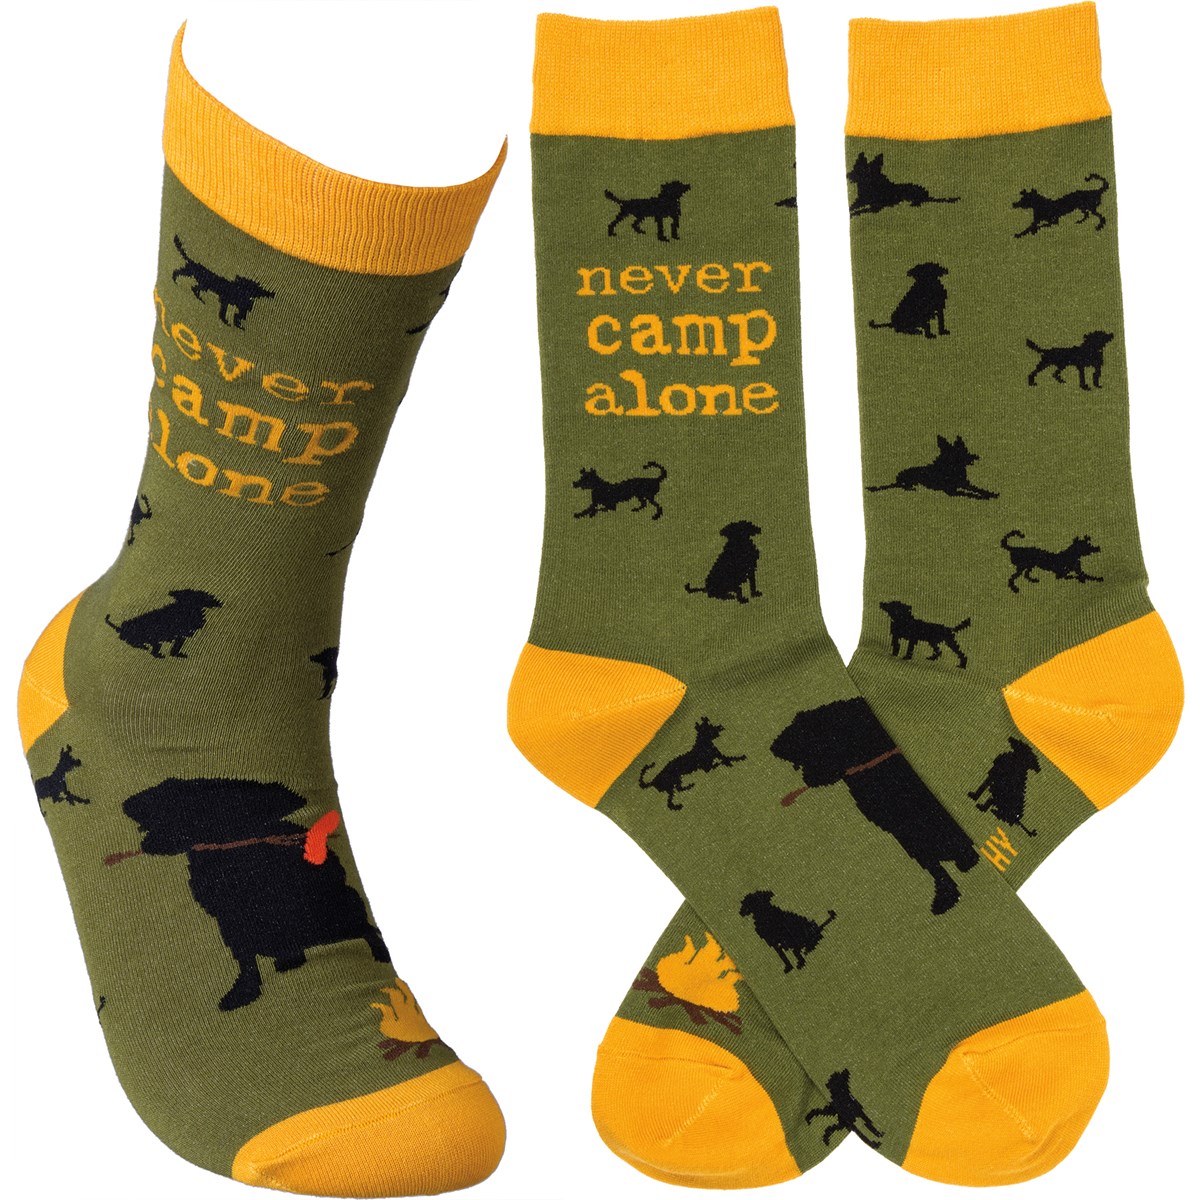 Socks - Never Camp Alone - One Size Fits Most - Cotton, Nylon, Spandex